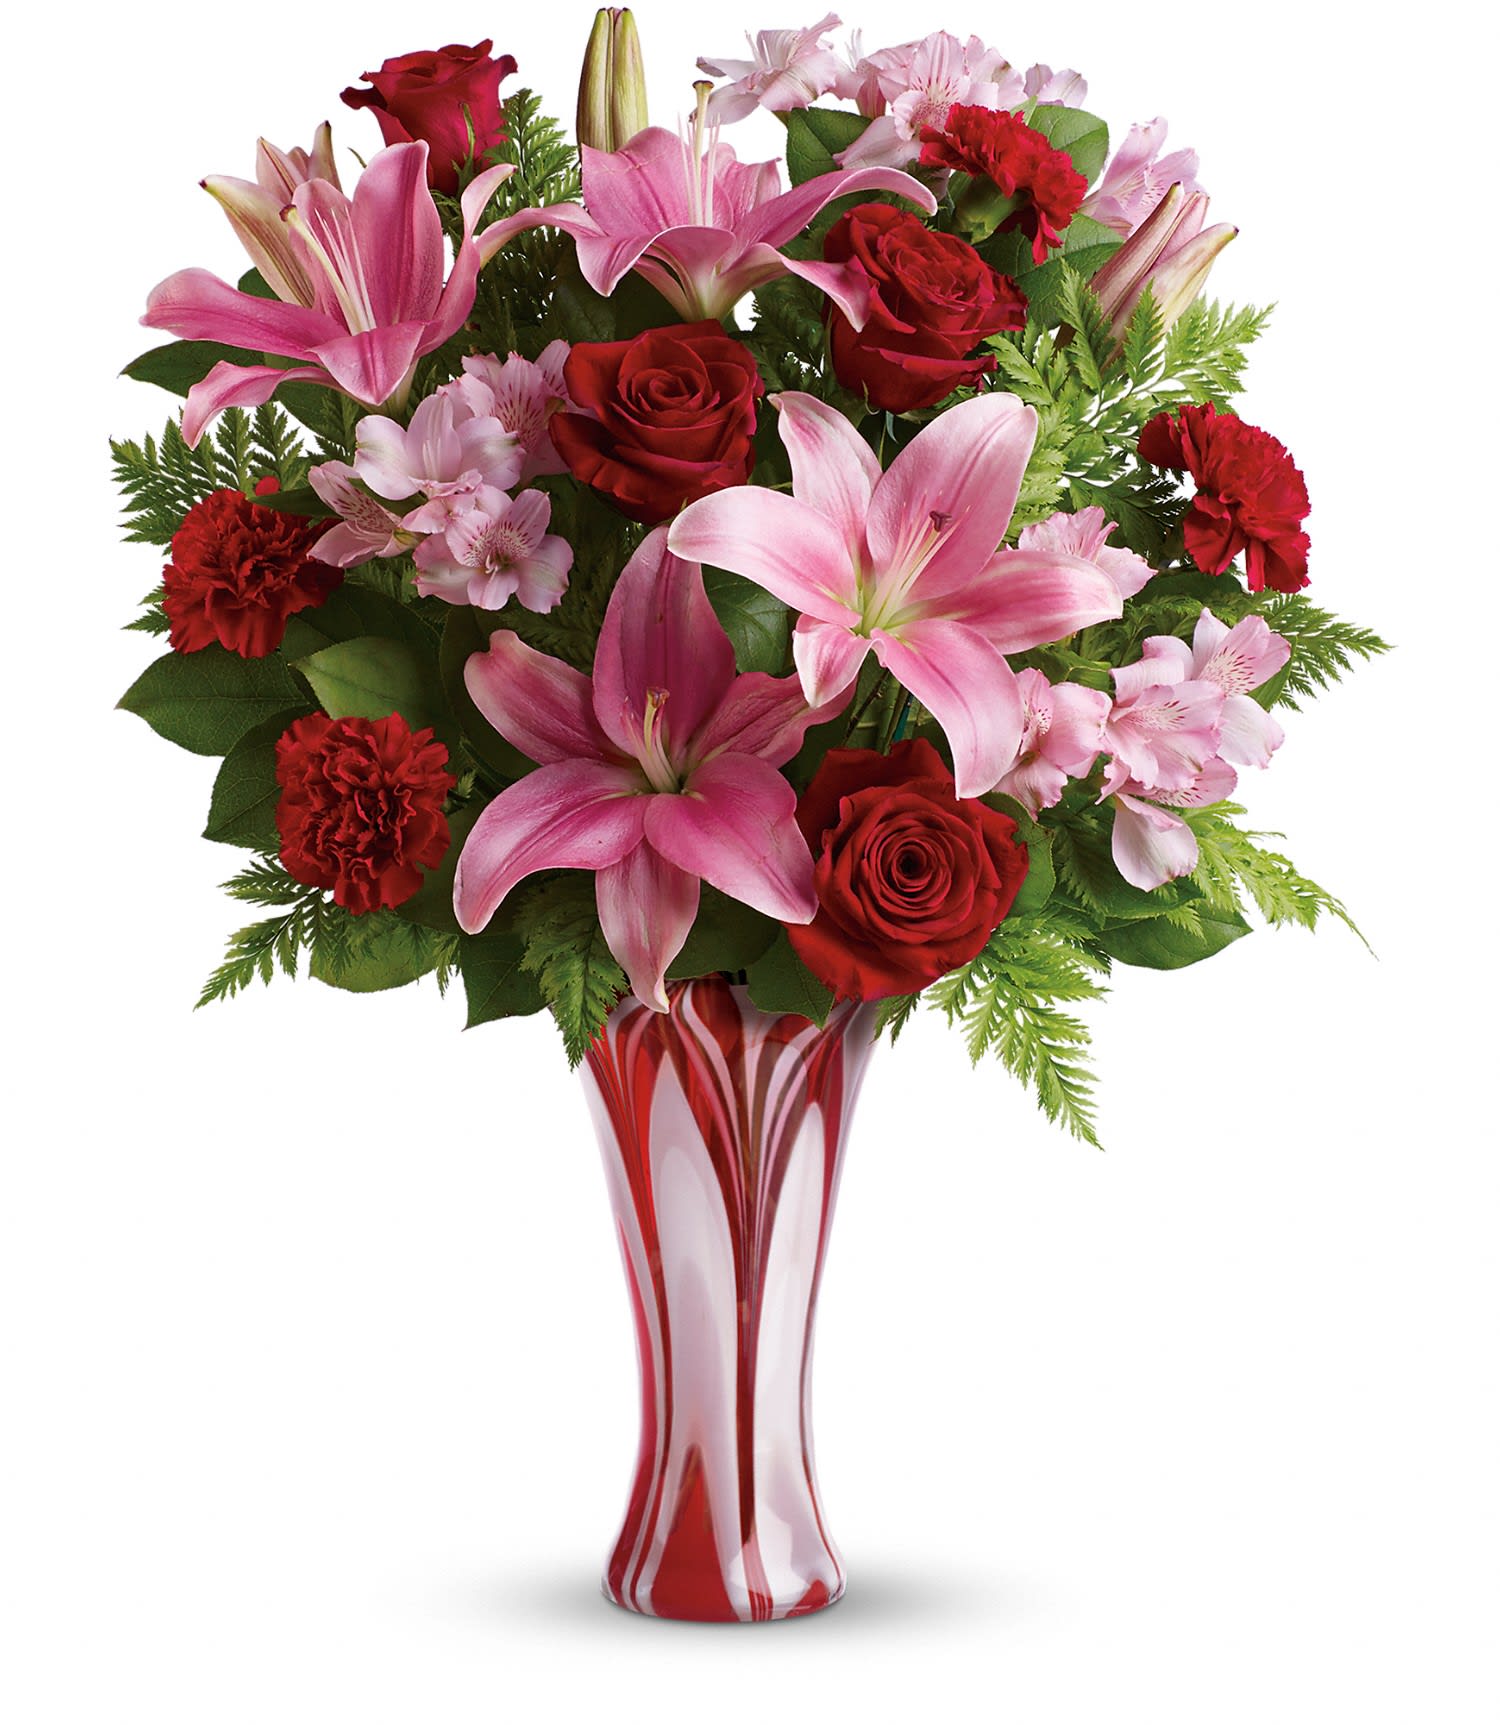 Teleflora's Rose Nouveau Bouquet DX - Romance is an art. Perfect it this Valentine's Day with this dramatic take on the classic red rose bouquet! Rich red roses, pretty pink lilies and delicate alstroemeria are masterfully arranged in a stunning glass vase she'll treasure forever. 